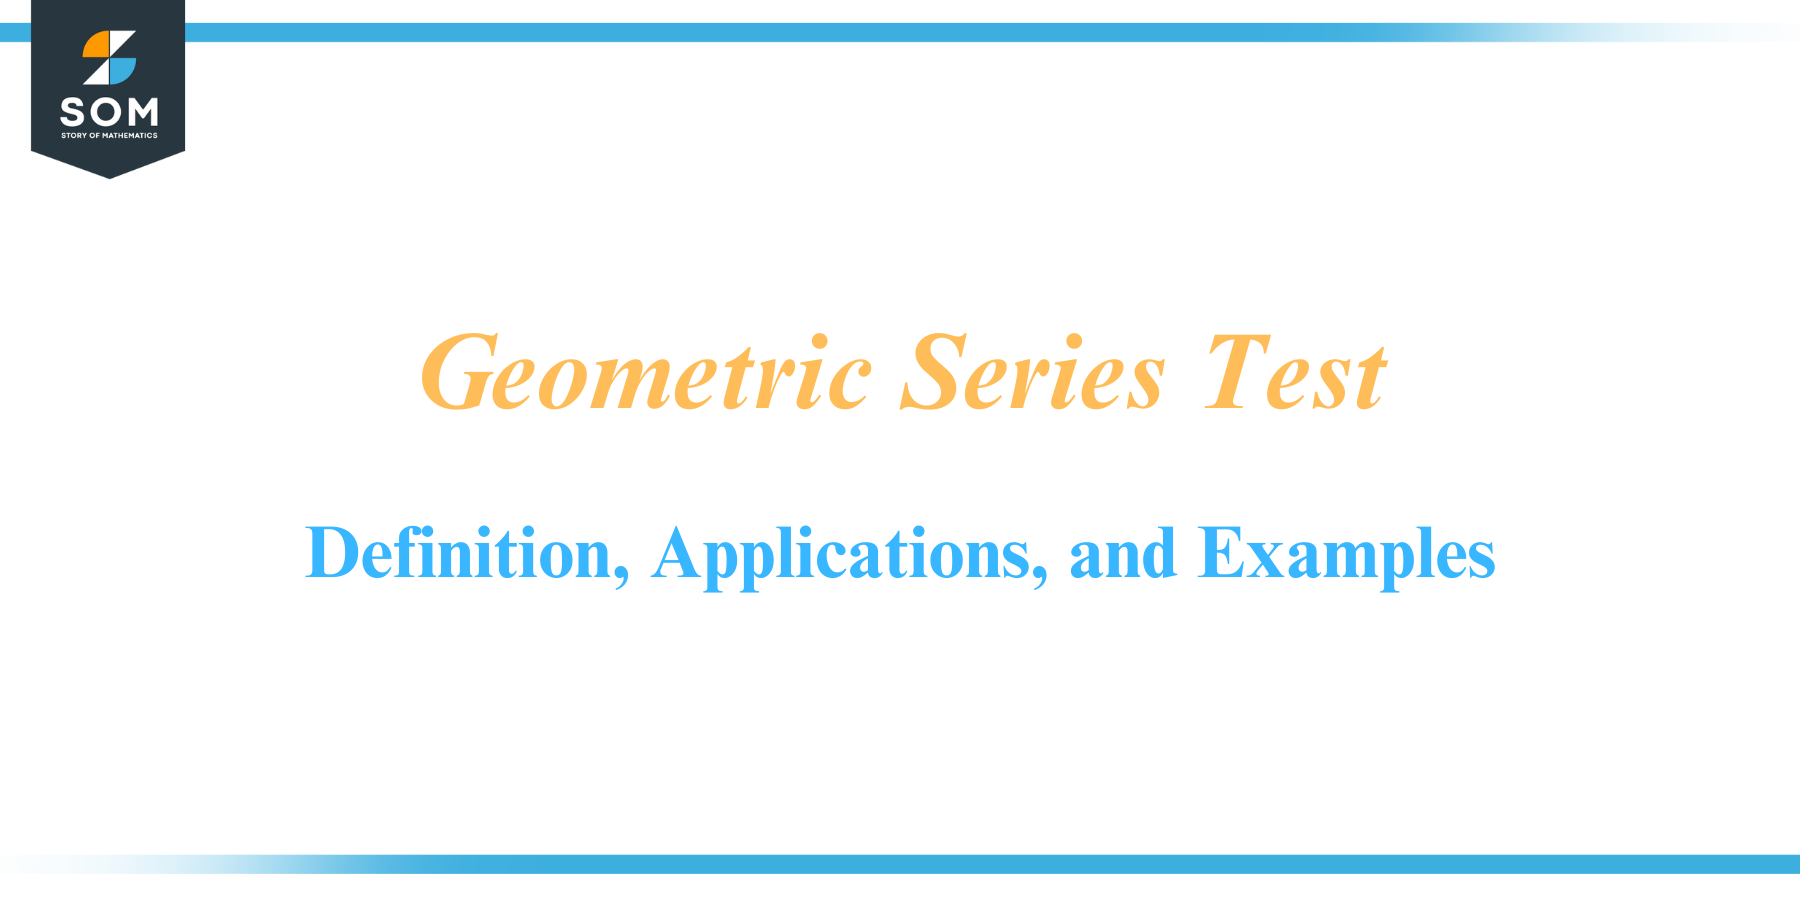 Geometric Series Test Definition Applications and